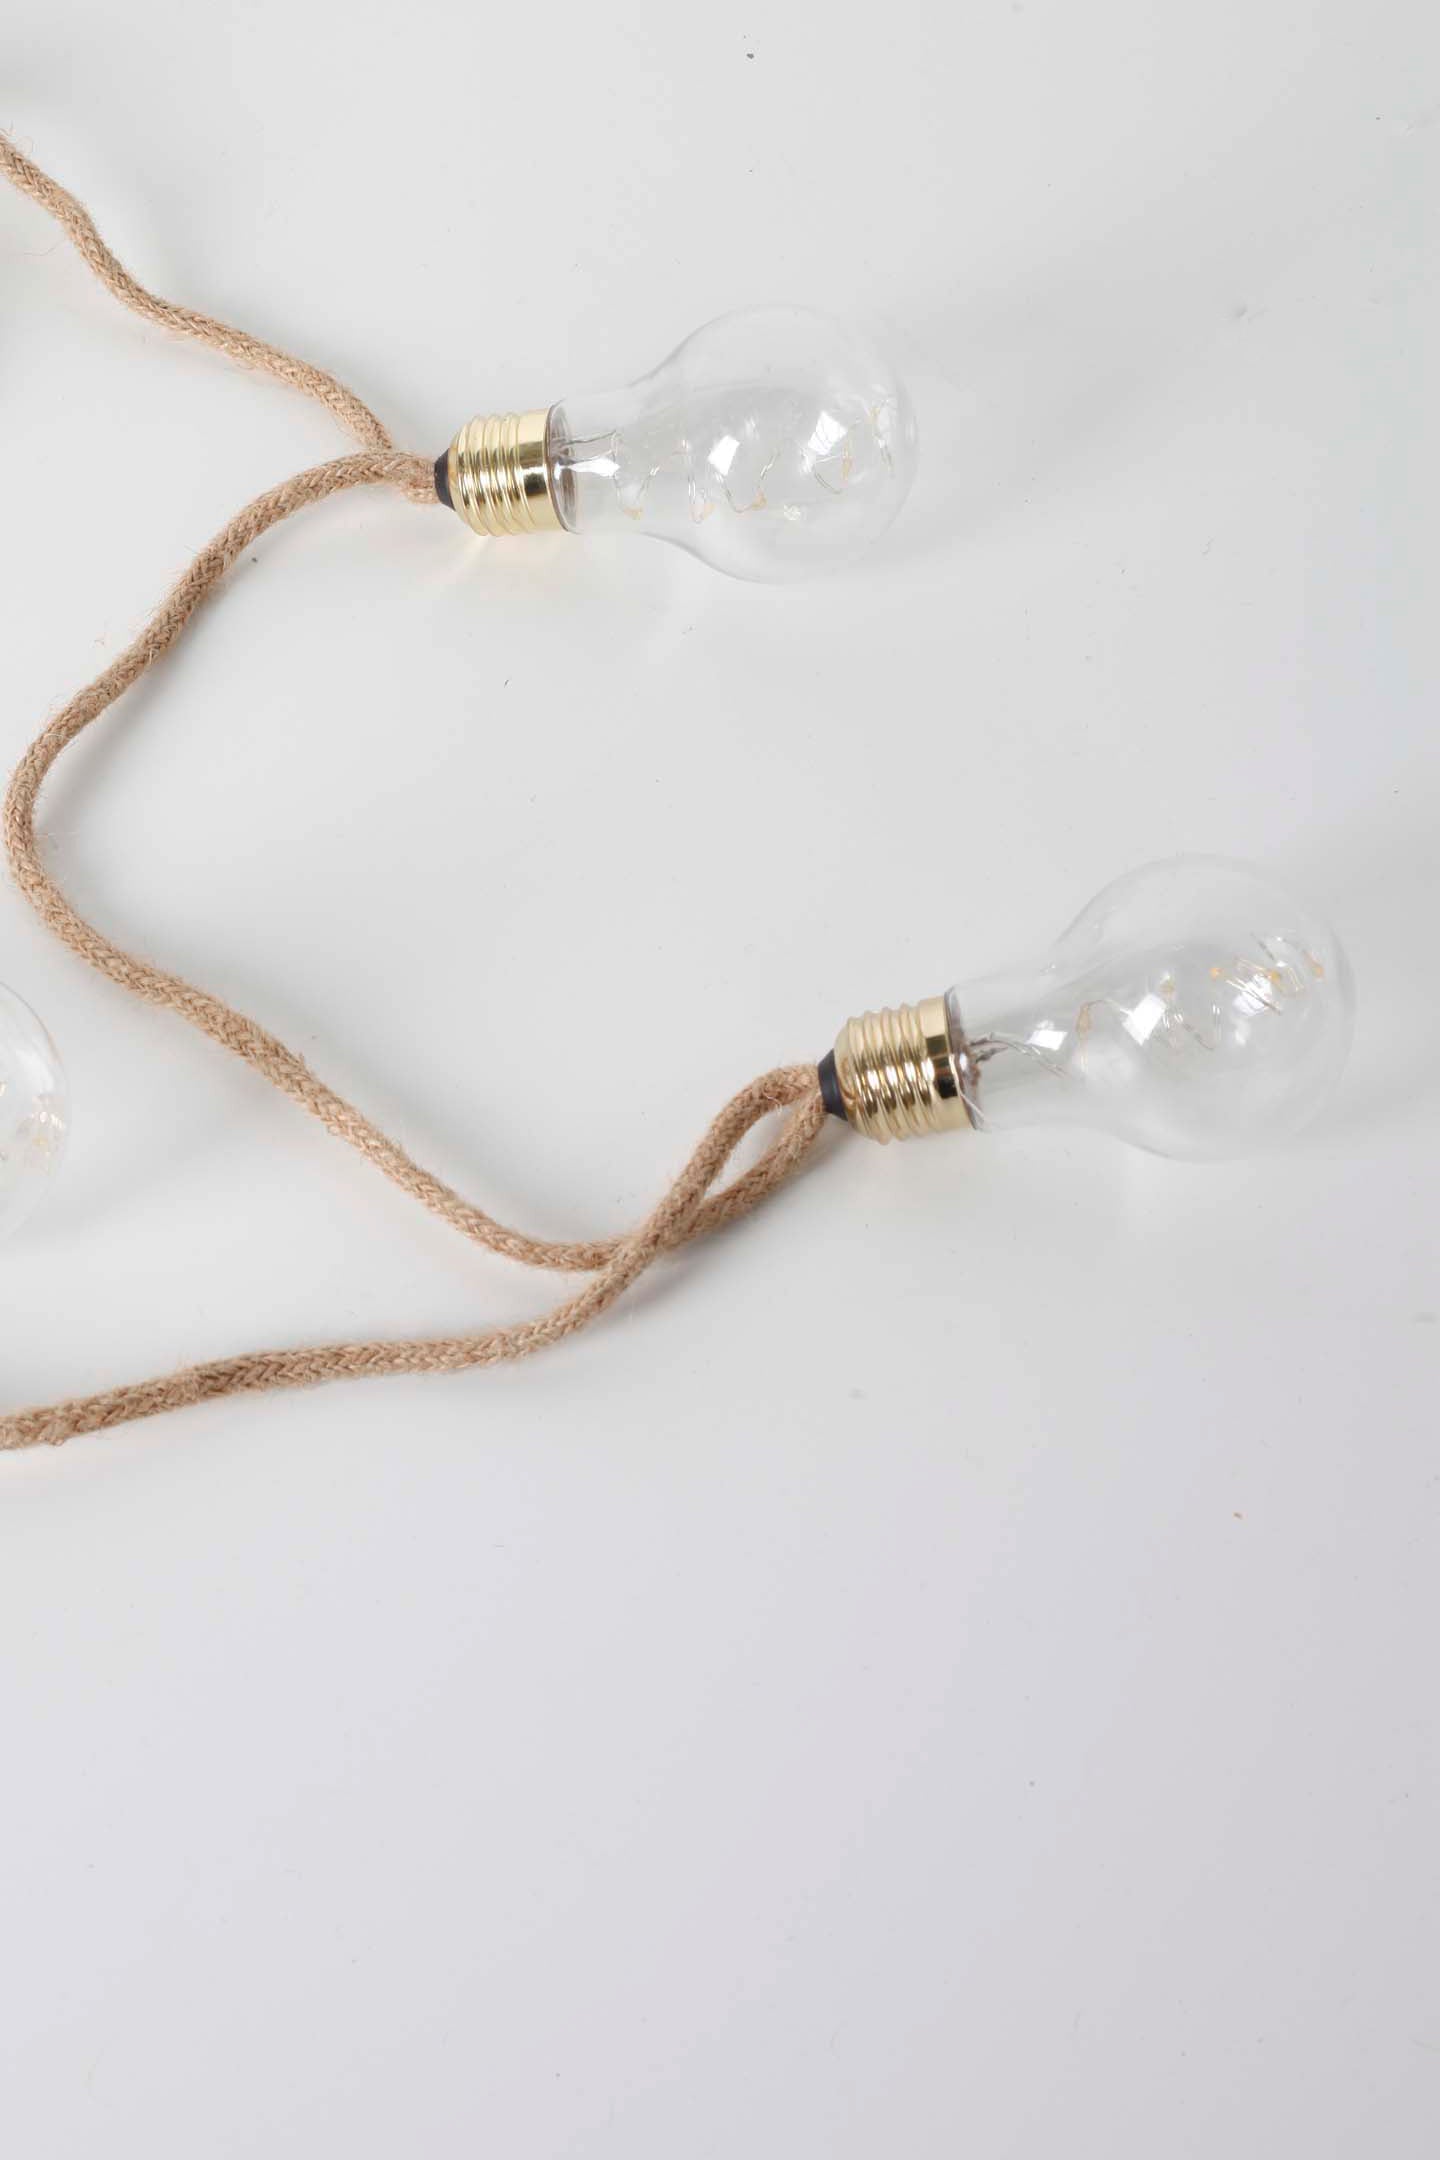 Rope String Lights with Plug